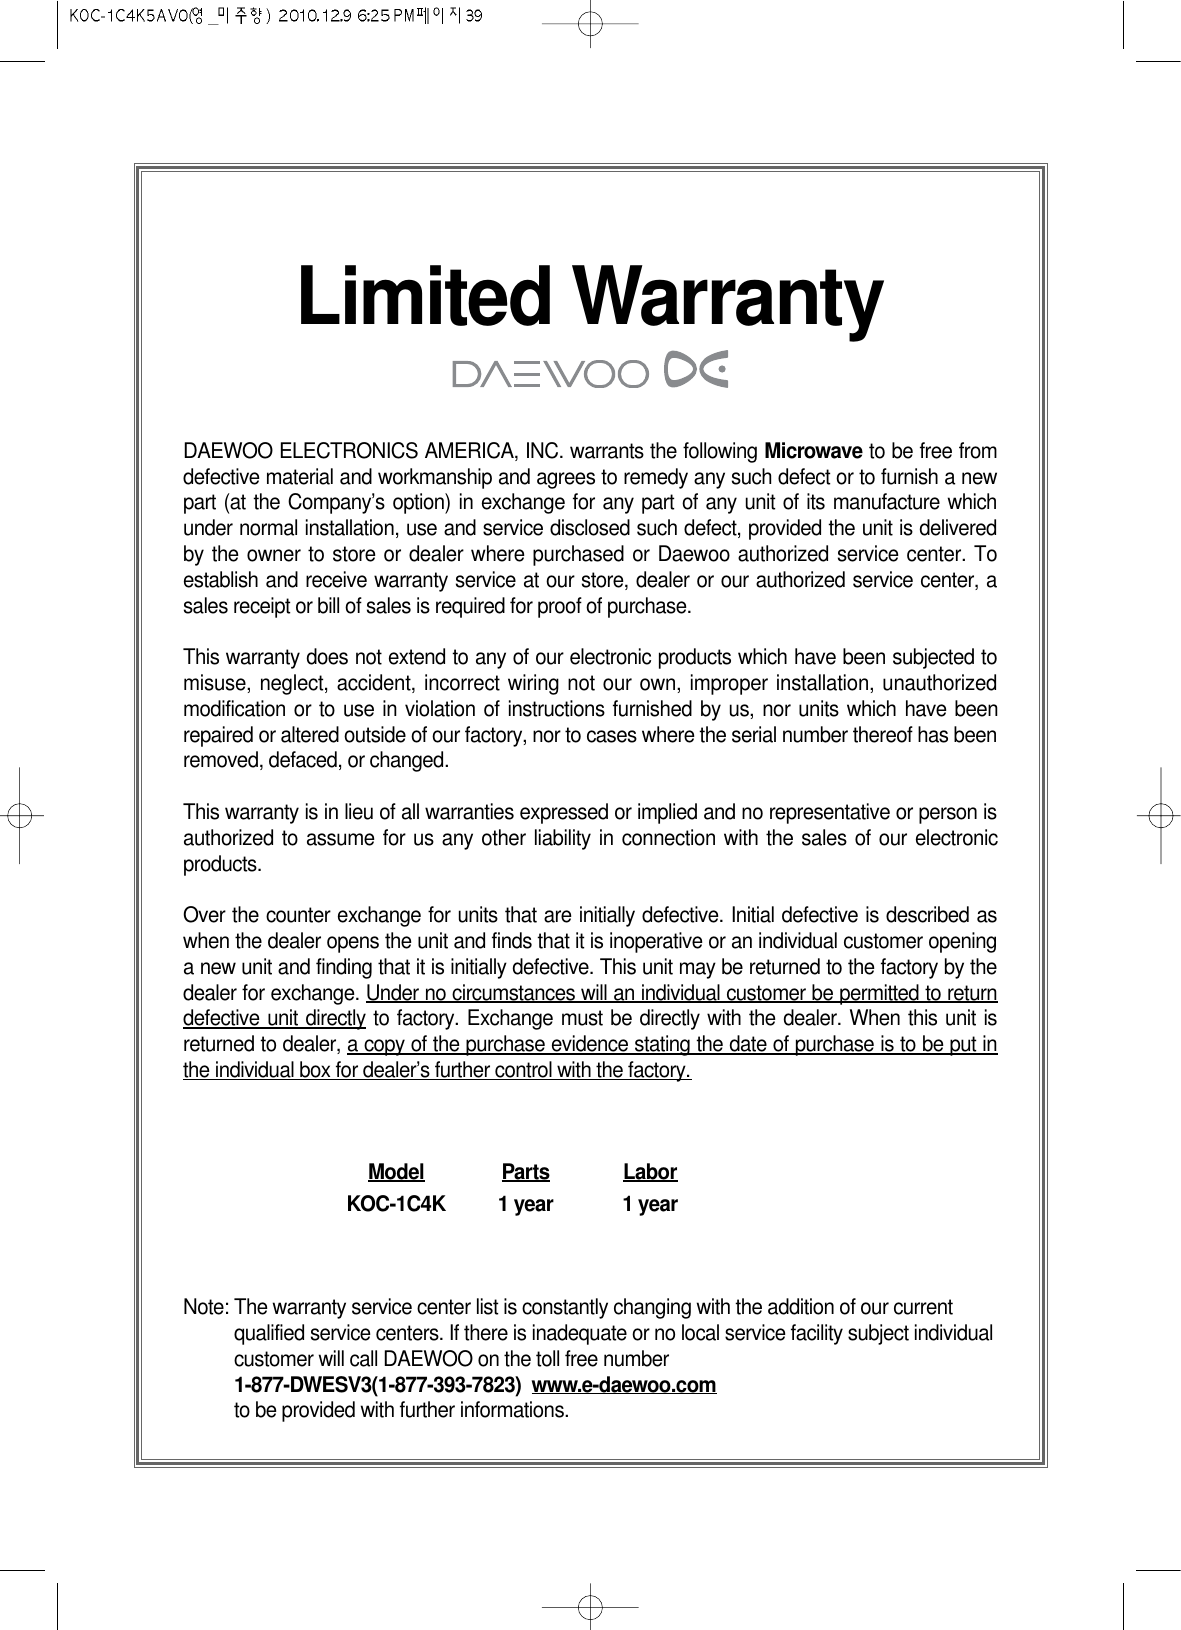 Limited WarrantyDAEWOO ELECTRONICS AMERICA, INC. warrants the following Microwave to be free fromdefective material and workmanship and agrees to remedy any such defect or to furnish a newpart (at the Company’s option) in exchange for any part of any unit of its manufacture whichunder normal installation, use and service disclosed such defect, provided the unit is deliveredby the owner to store or dealer where purchased or Daewoo authorized service center. Toestablish and receive warranty service at our store, dealer or our authorized service center, asales receipt or bill of sales is required for proof of purchase.This warranty does not extend to any of our electronic products which have been subjected tomisuse, neglect, accident, incorrect wiring not our own, improper installation, unauthorizedmodification or to use in violation of instructions furnished by us, nor units which have beenrepaired or altered outside of our factory, nor to cases where the serial number thereof has beenremoved, defaced, or changed.This warranty is in lieu of all warranties expressed or implied and no representative or person isauthorized to assume for us any other liability in connection with the sales of our electronicproducts.Over the counter exchange for units that are initially defective. Initial defective is described aswhen the dealer opens the unit and finds that it is inoperative or an individual customer openinga new unit and finding that it is initially defective. This unit may be returned to the factory by thedealer for exchange. Under no circumstances will an individual customer be permitted to returndefective unit directly to factory. Exchange must be directly with the dealer. When this unit isreturned to dealer, a copy of the purchase evidence stating the date of purchase is to be put inthe individual box for dealer’s further control with the factory.Model Parts LaborKOC-1C4K 1 year 1 yearNote: The warranty service center list is constantly changing with the addition of our currentqualified service centers. If there is inadequate or no local service facility subject individualcustomer will call DAEWOO on the toll free number1-877-DWESV3(1-877-393-7823)  www.e-daewoo.comto be provided with further informations.